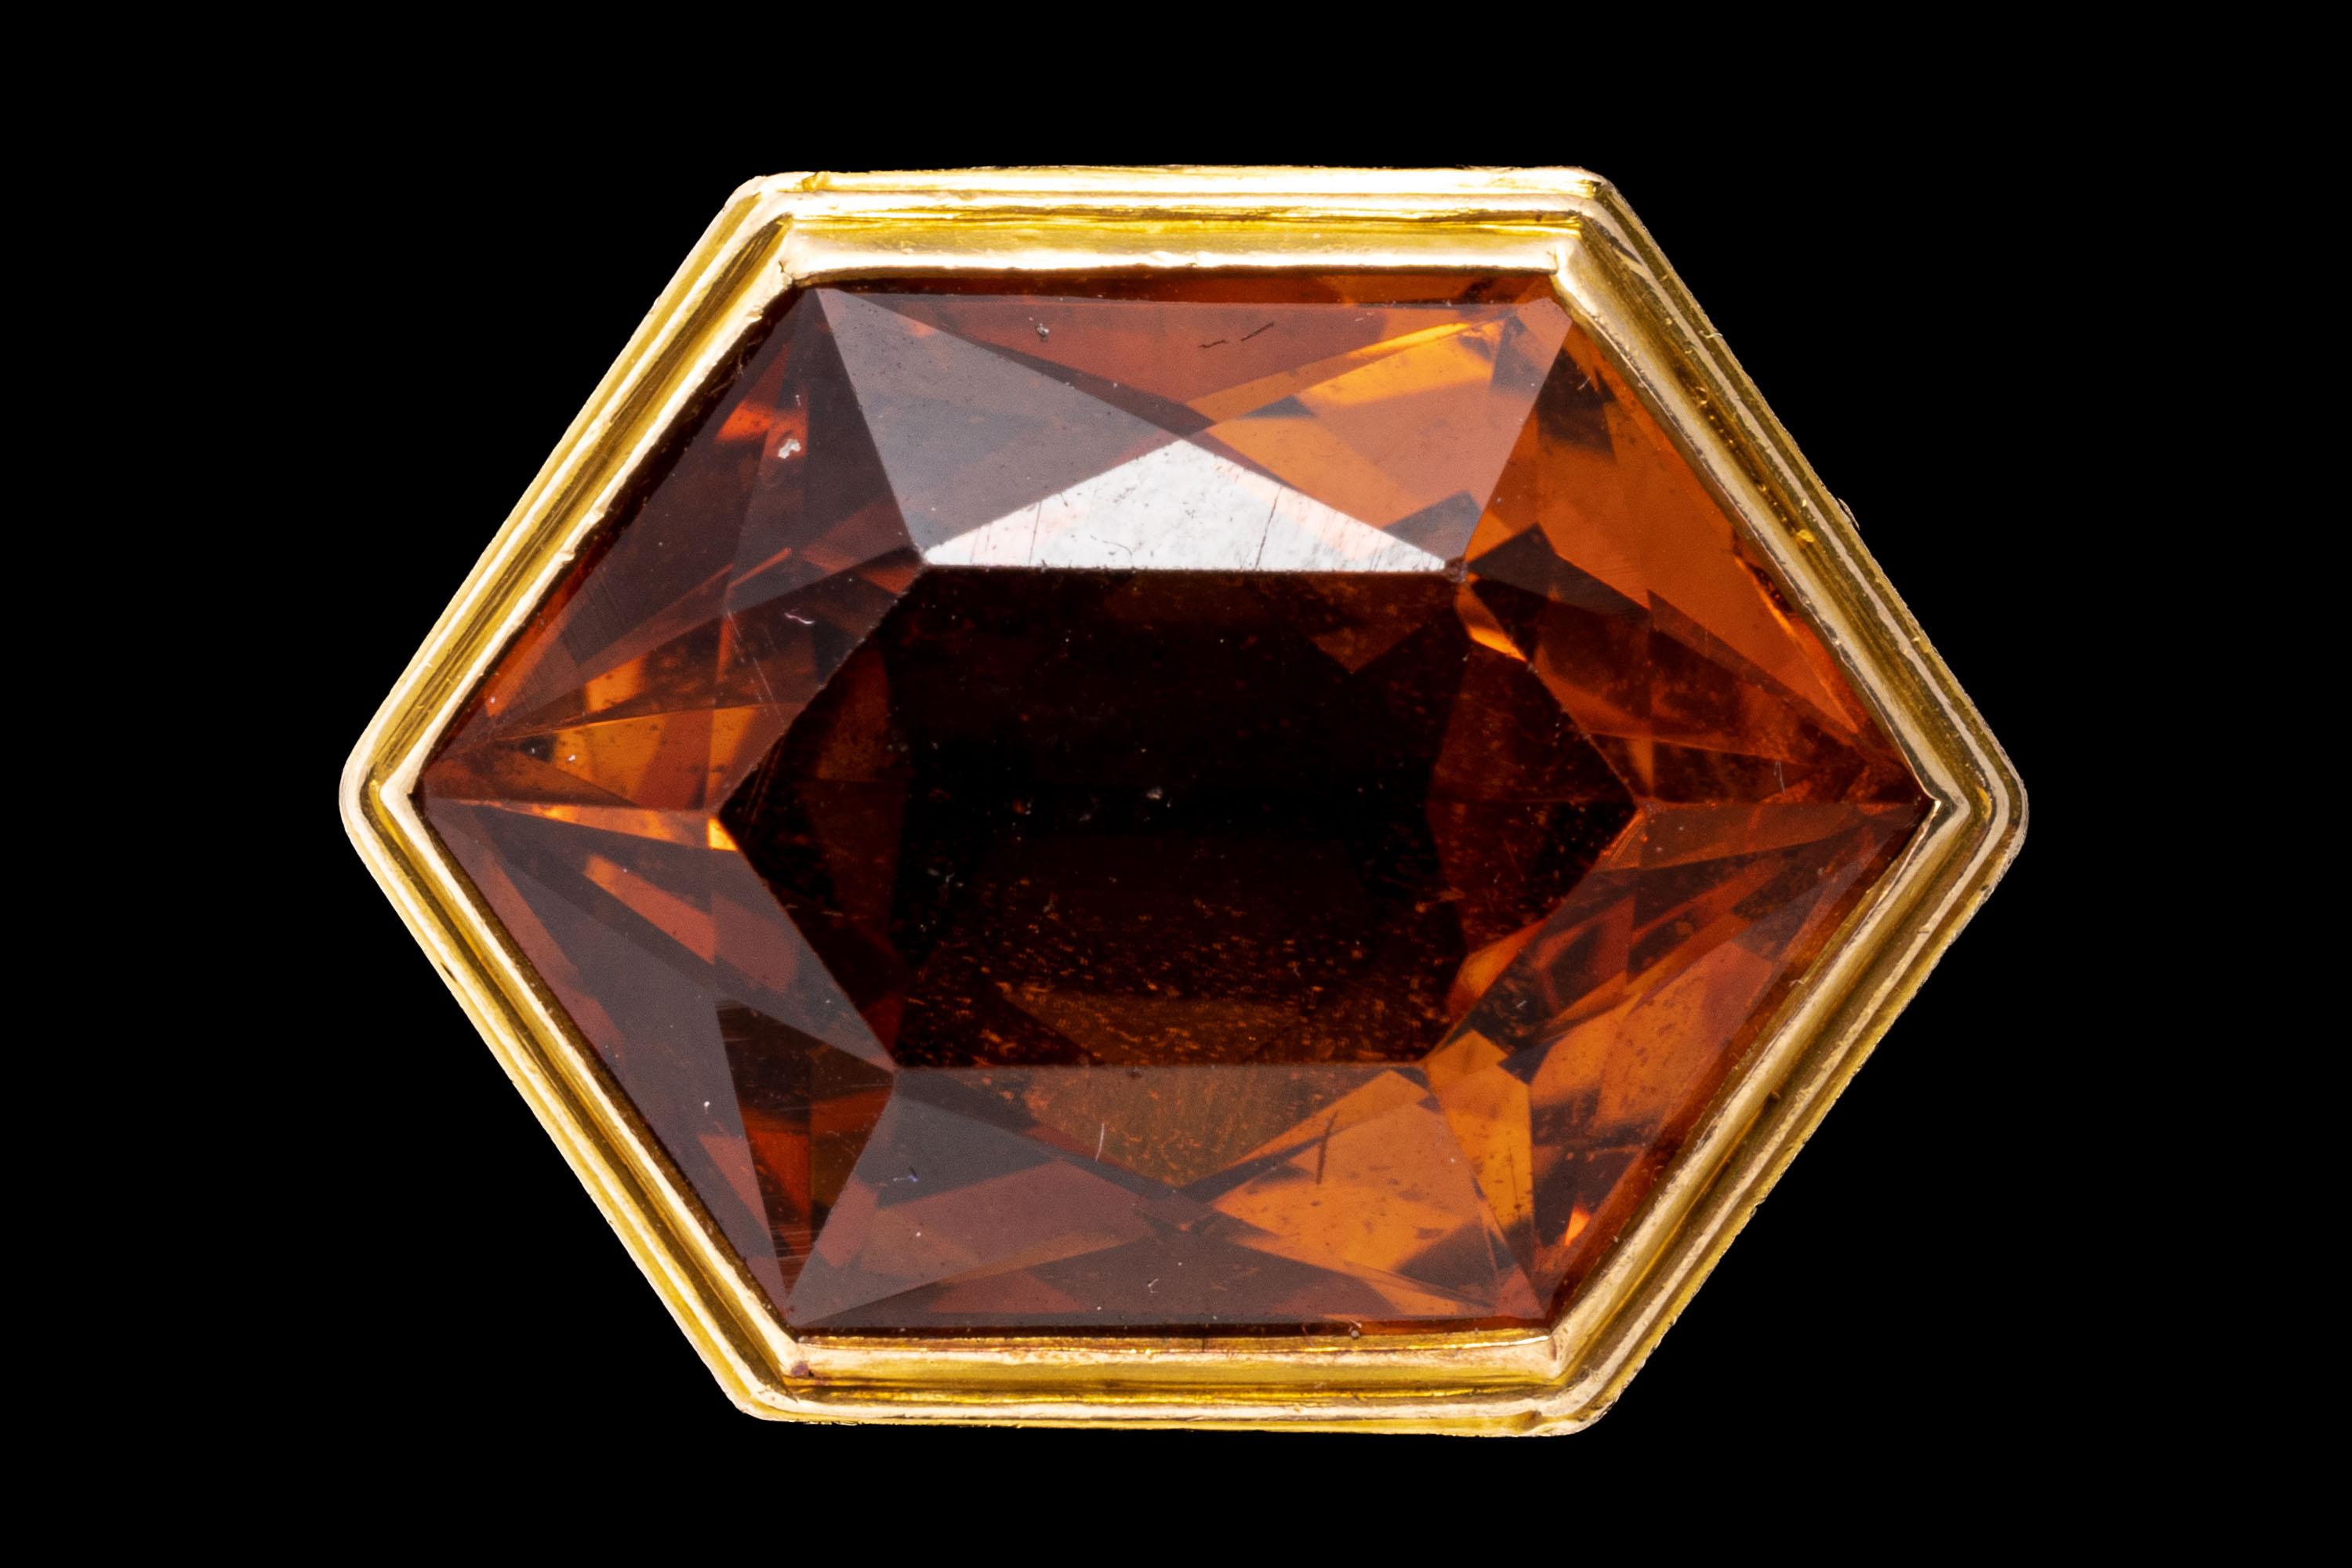 12k yellow gold ring. This wonderful ring features a center elongated hexagonal faceted, medium to dark orange color citrine, horizontally situated, and decorated with a grape and vine motif gallery and sides.
Marks: None, tests 12k
Dimensions: